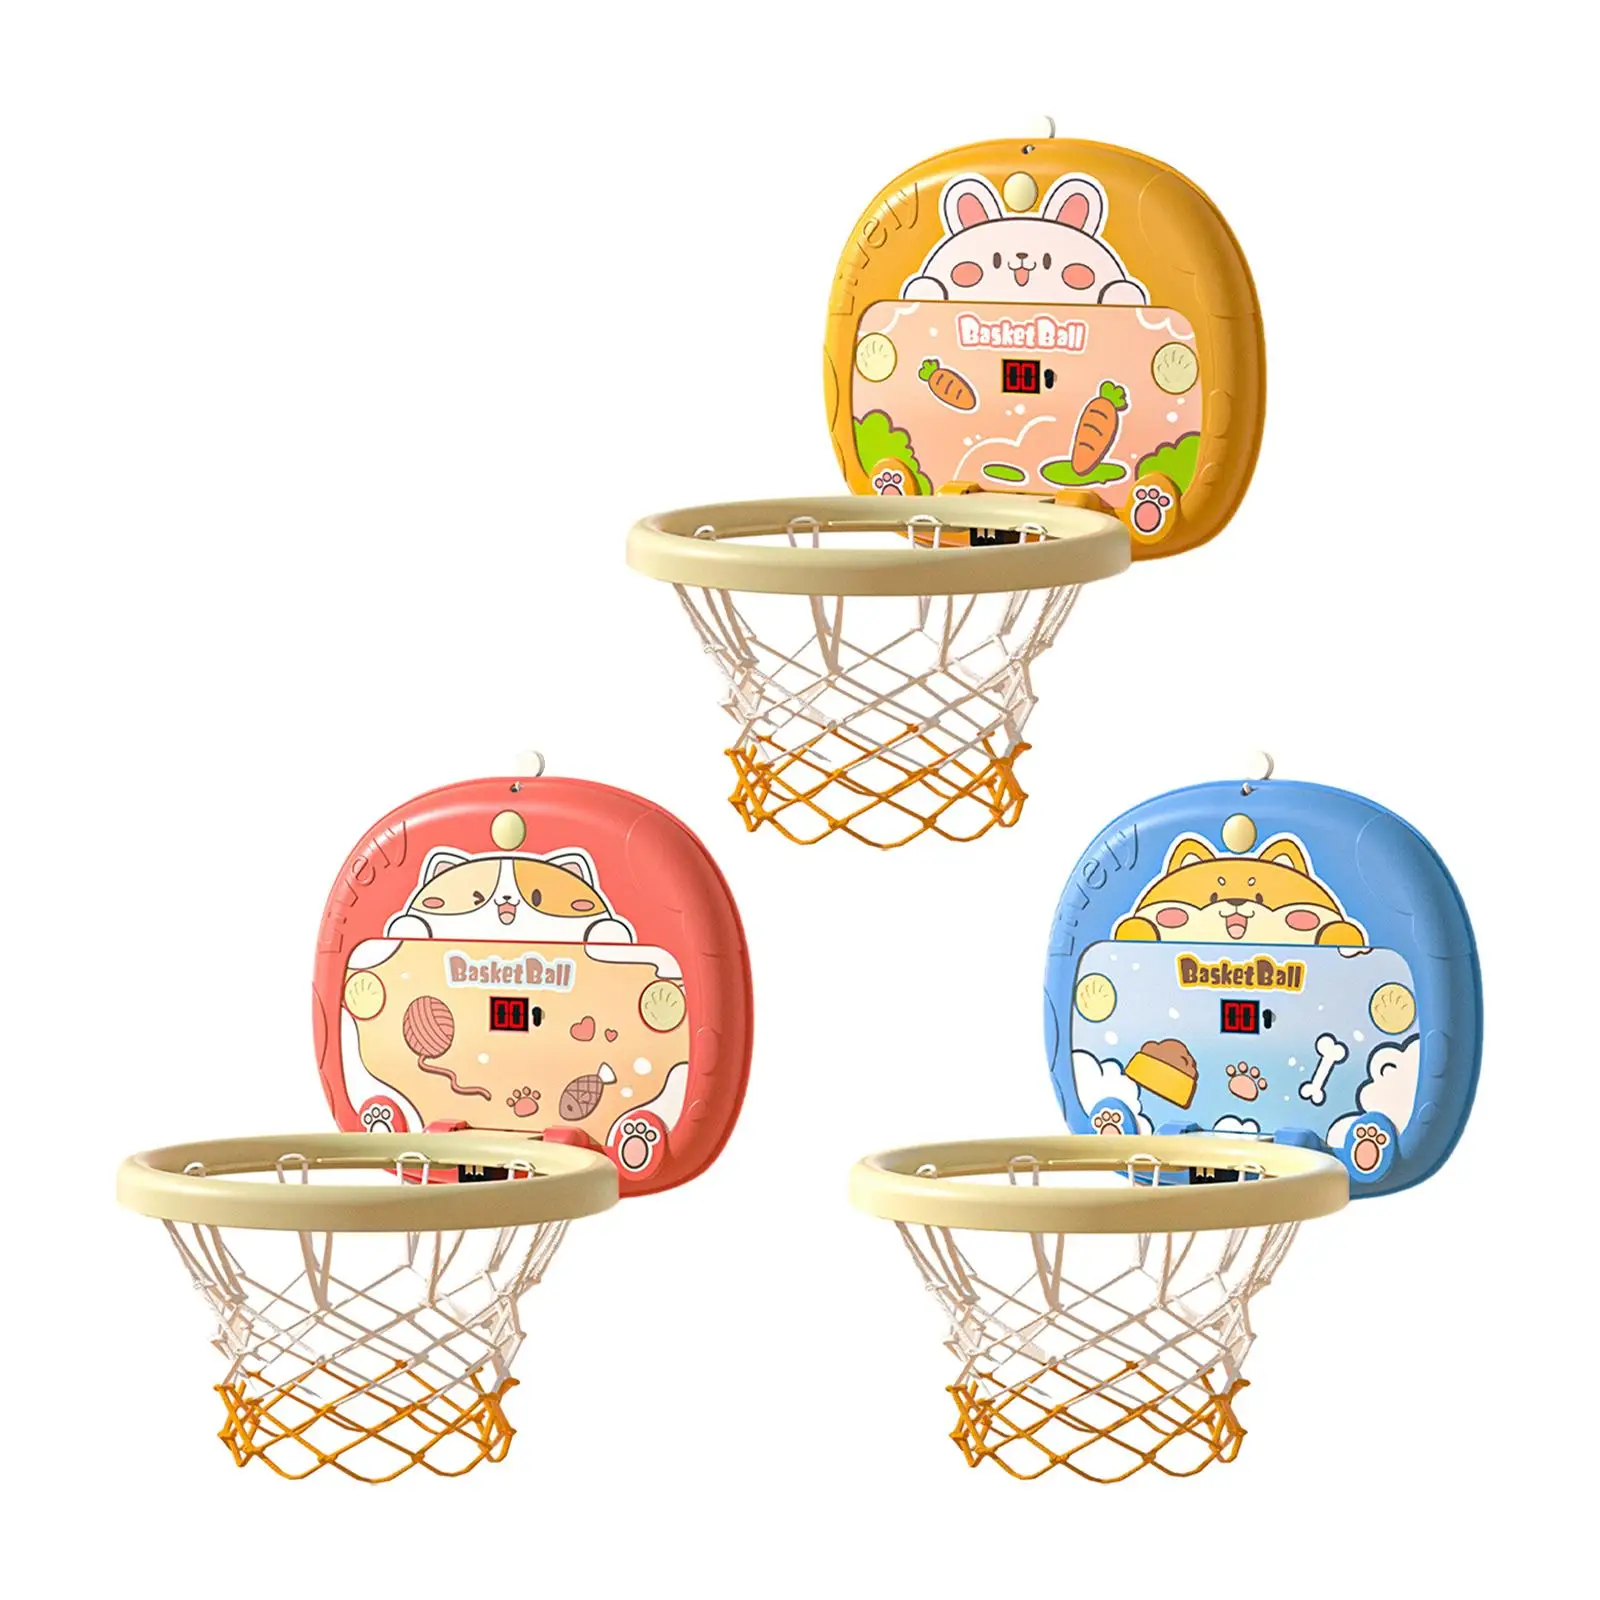 Indoor Mini Basketball Hoop with Balls Basketball Goal Indoor Game Set Interactive Toys for Wall Office Home Door Adults Gifts